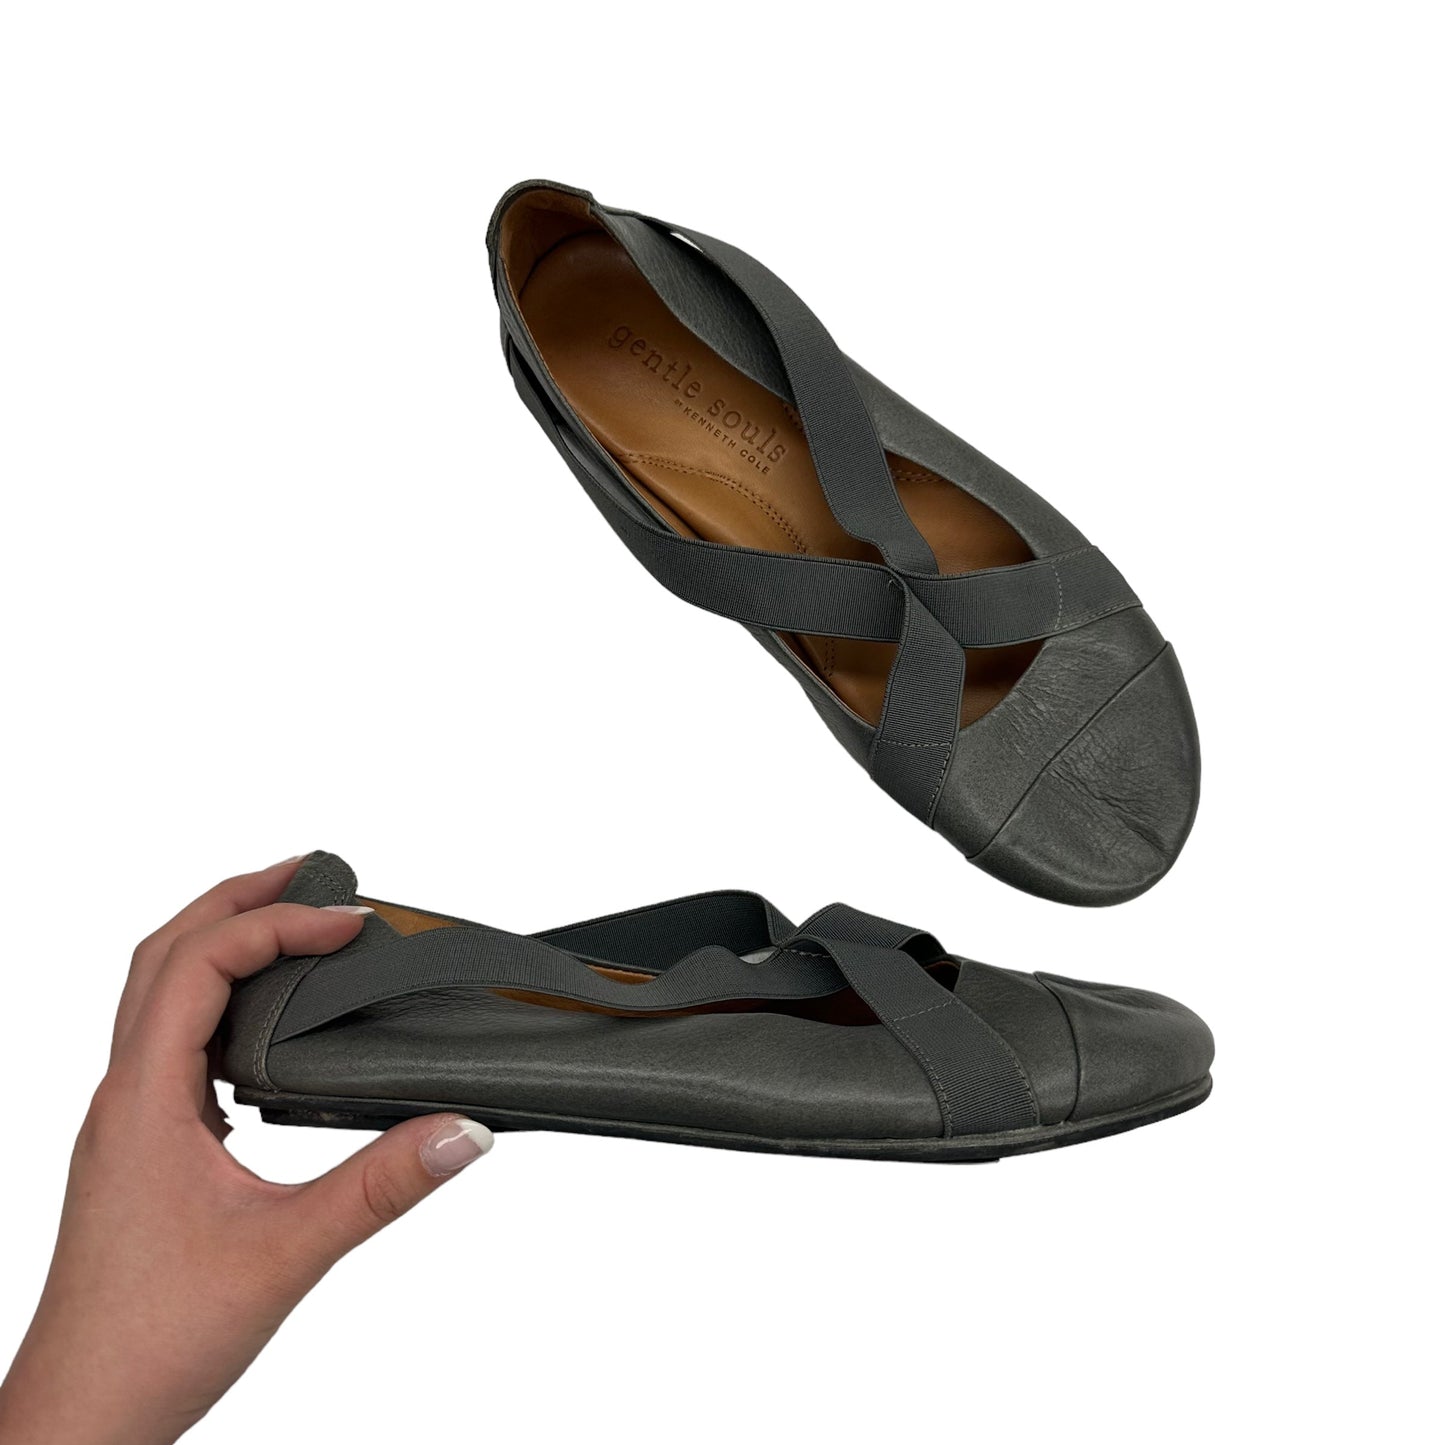 Shoes Flats By Gentle Souls  Size: 8.5